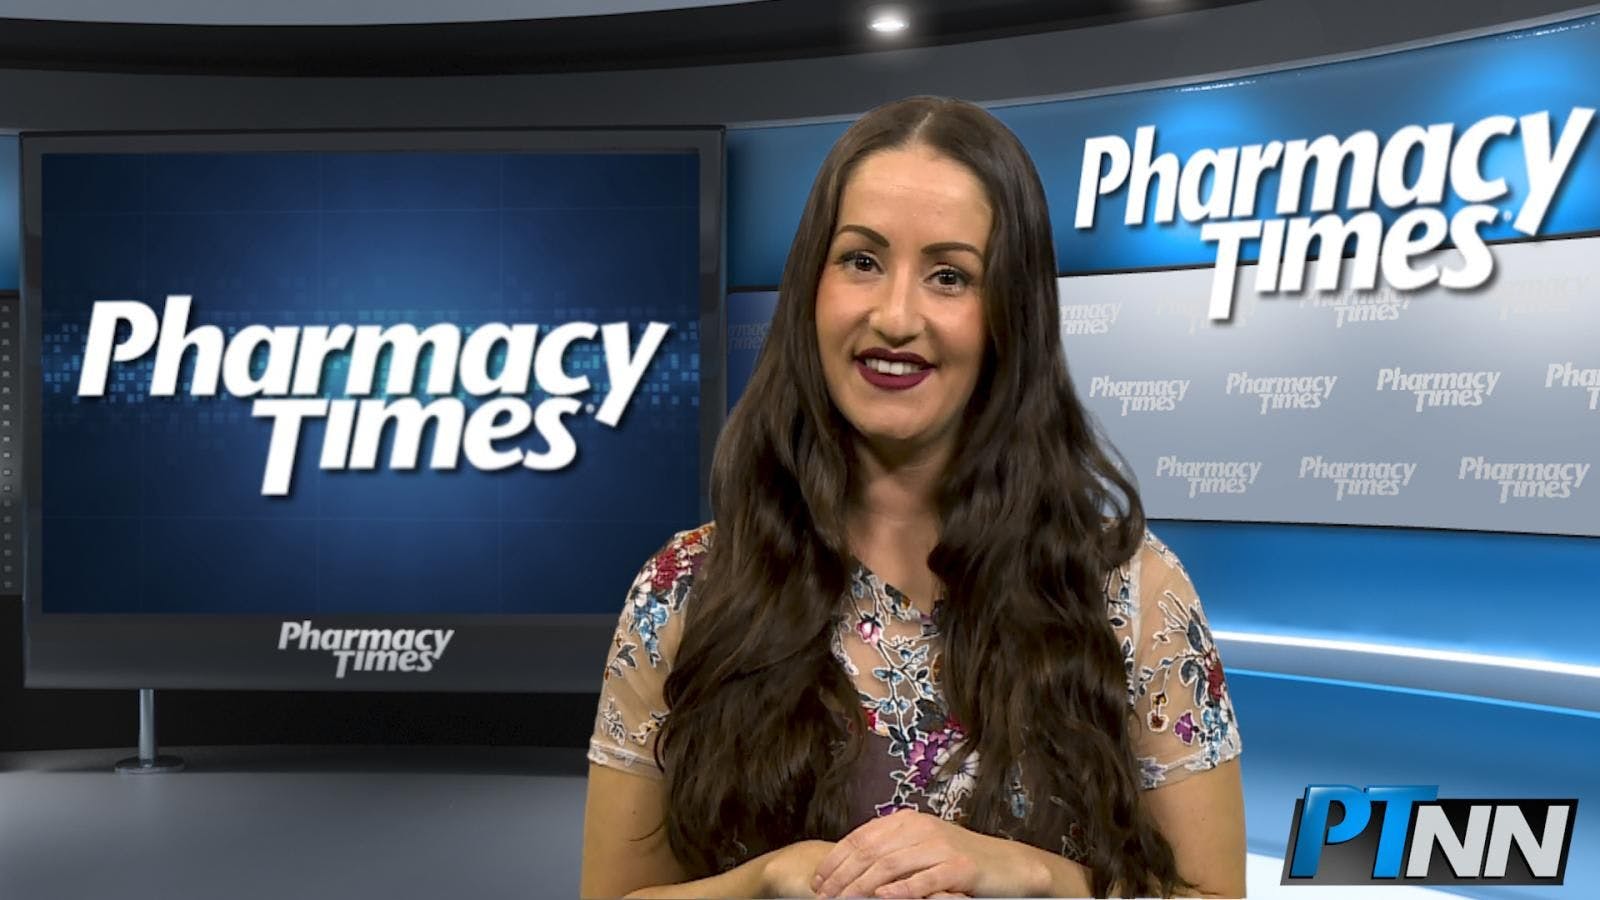 March 8 Pharmacy Week in Review: Walgreens Launches Pharmacy Service for Patients with Cancer, Price Reduction in Diabetes Medication